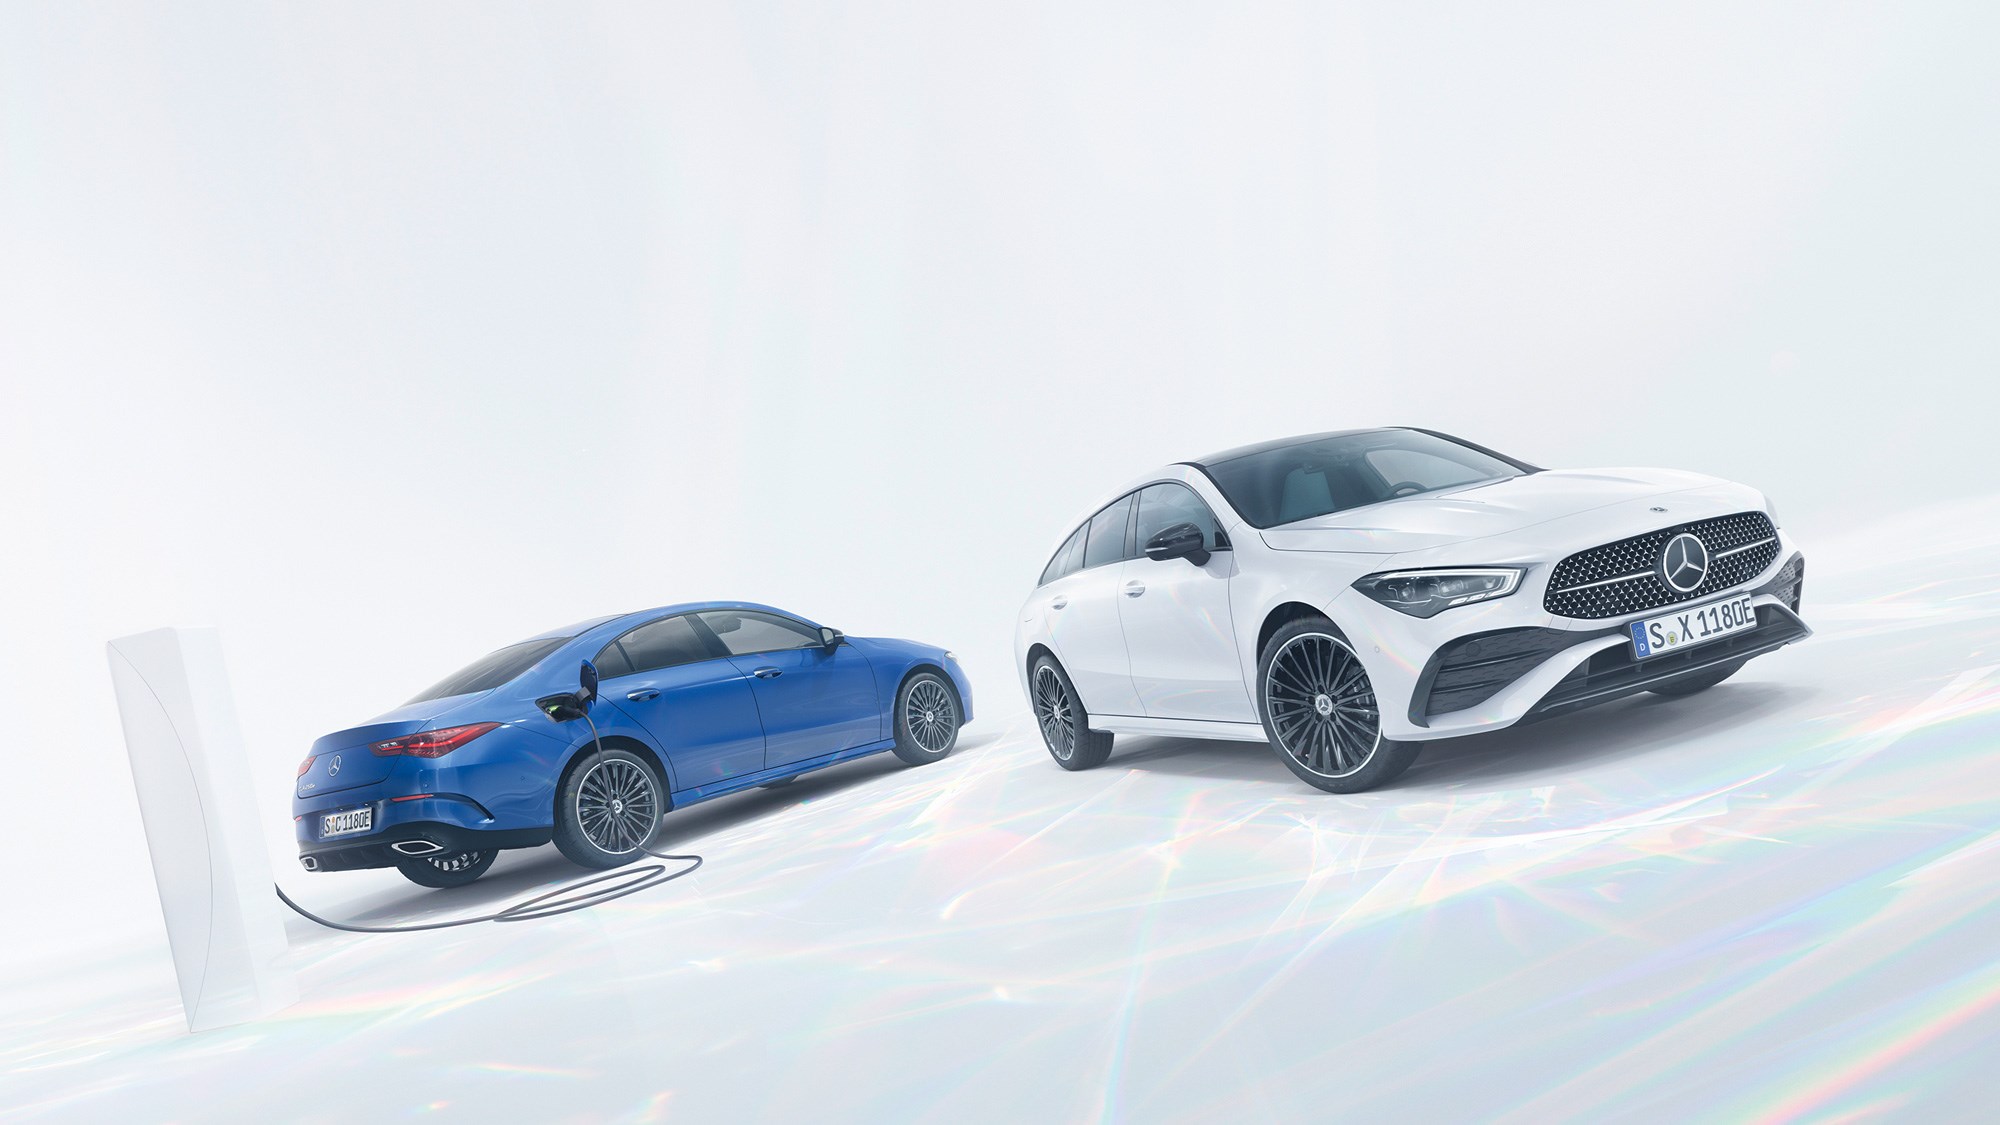 2022 Mercedes-Benz CLA-Class Prices, Reviews, and Pictures